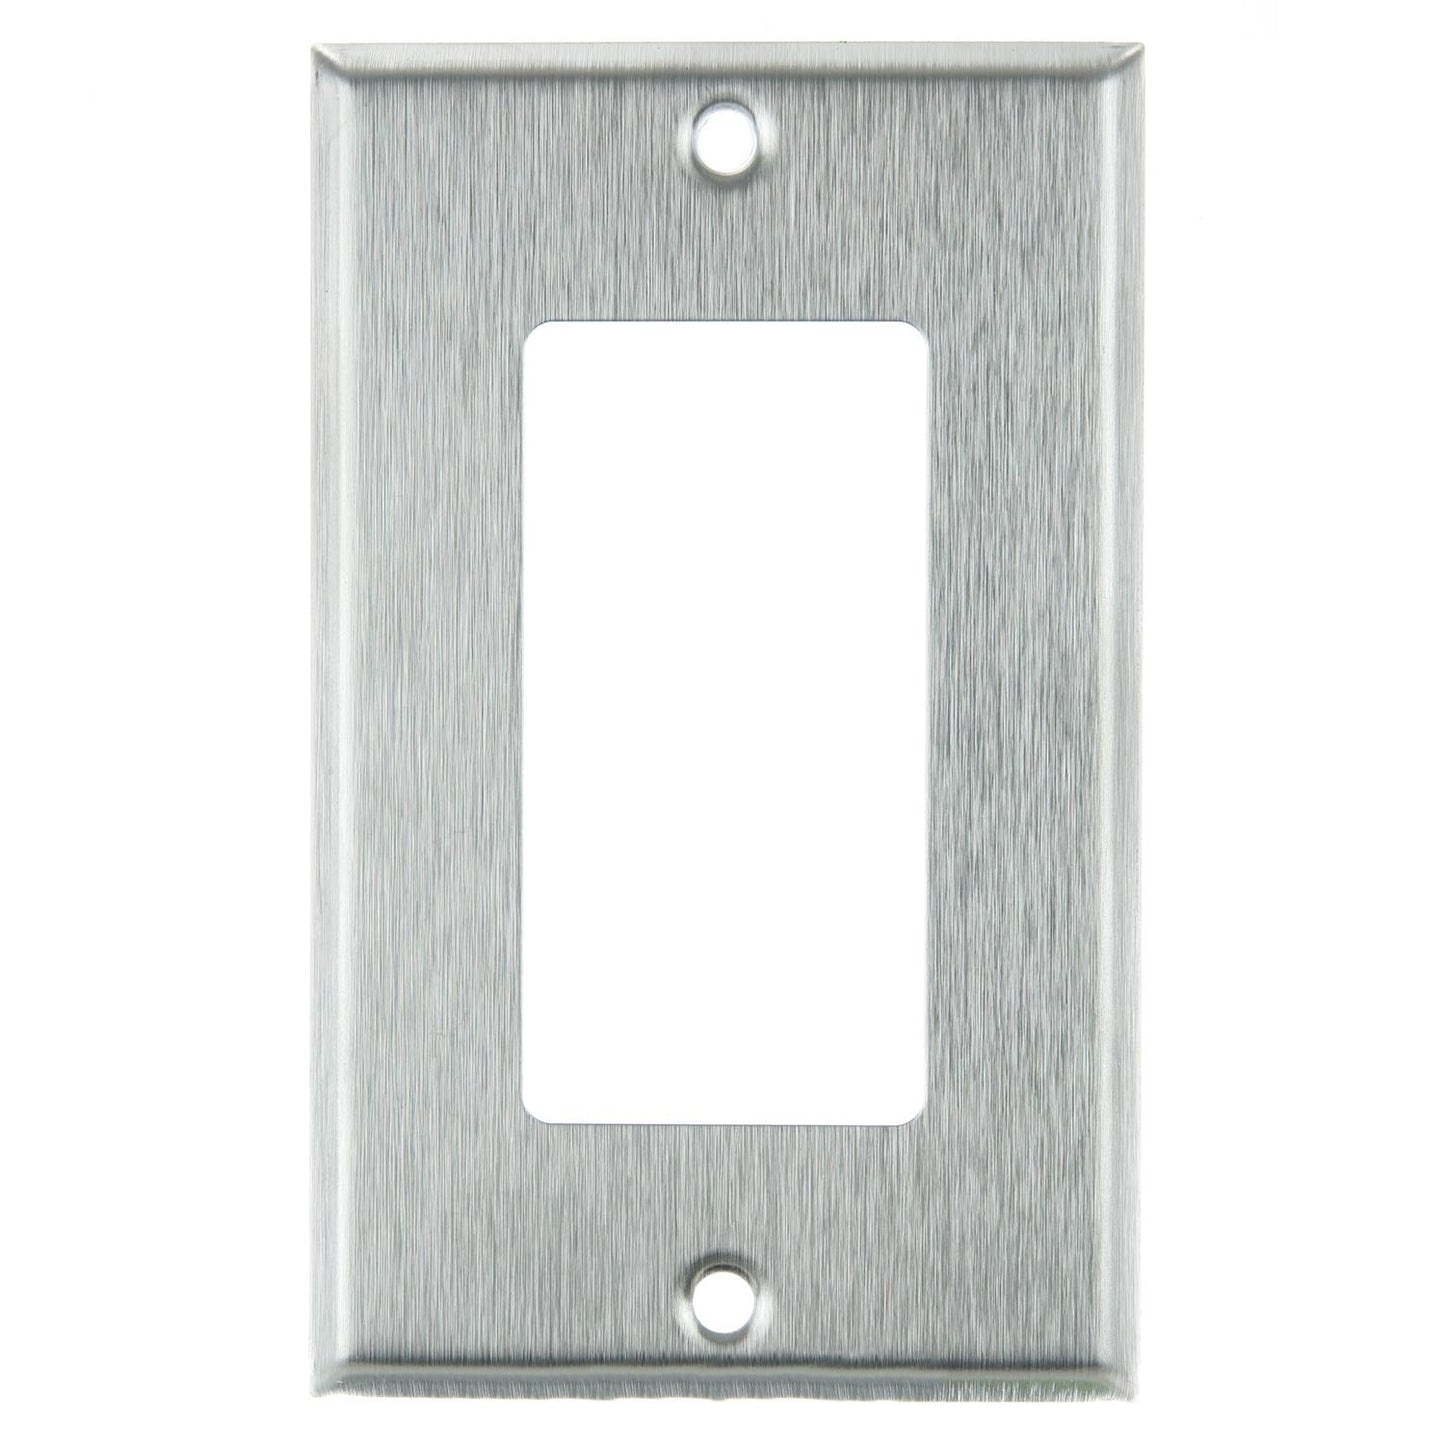 Sunlite E301/S 1 Gang Decorative Switch and Receptacle Plate, Steel